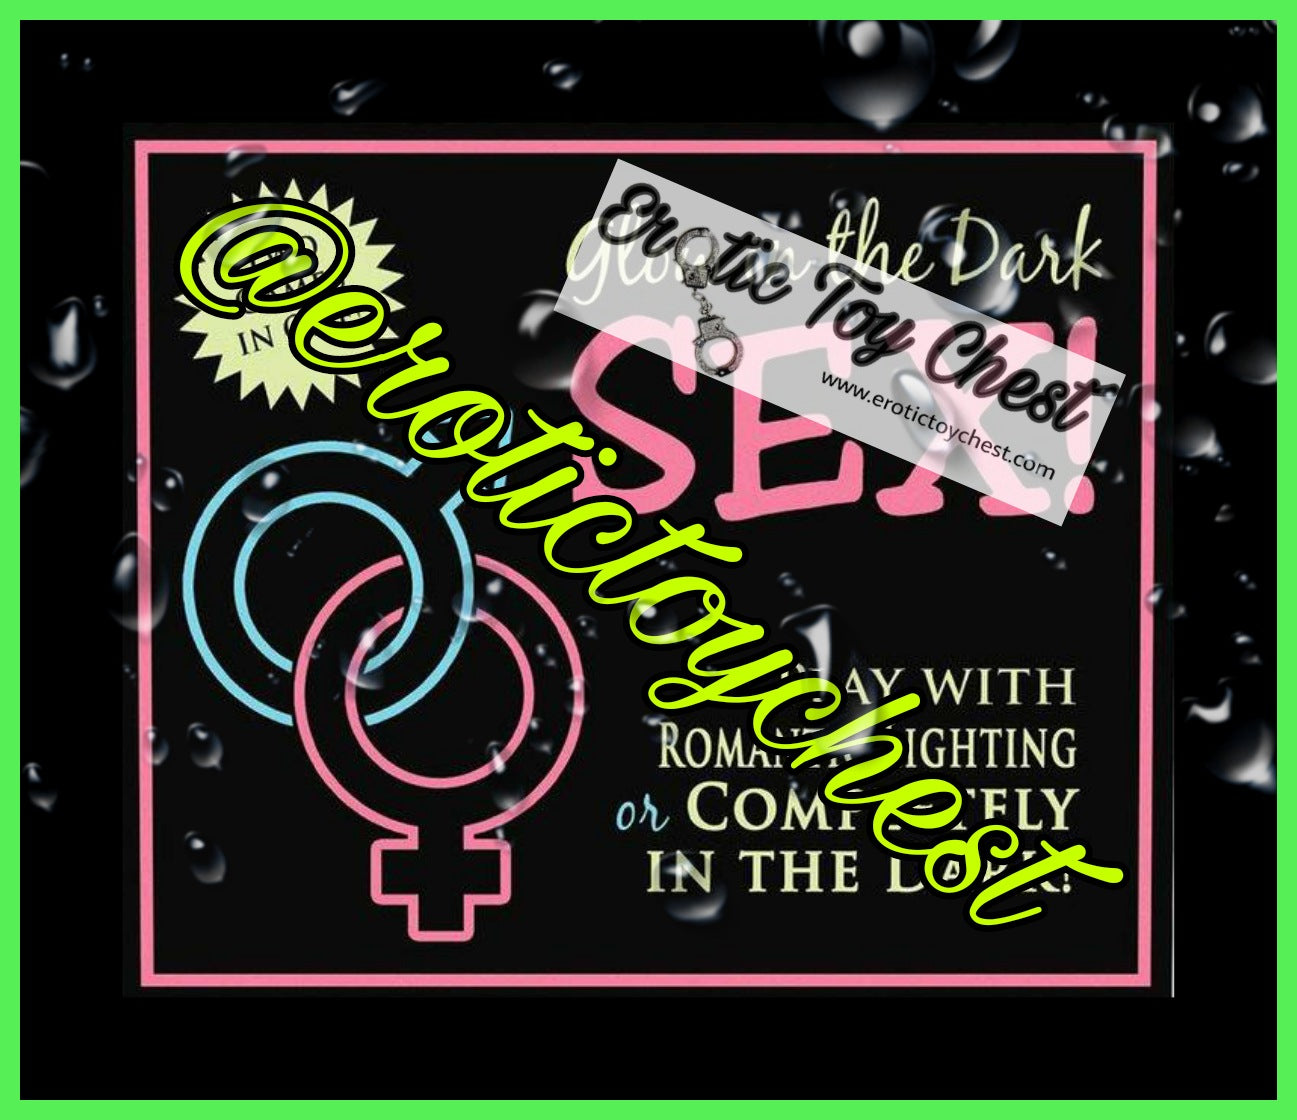 The Glow in the Dark Sex The Game